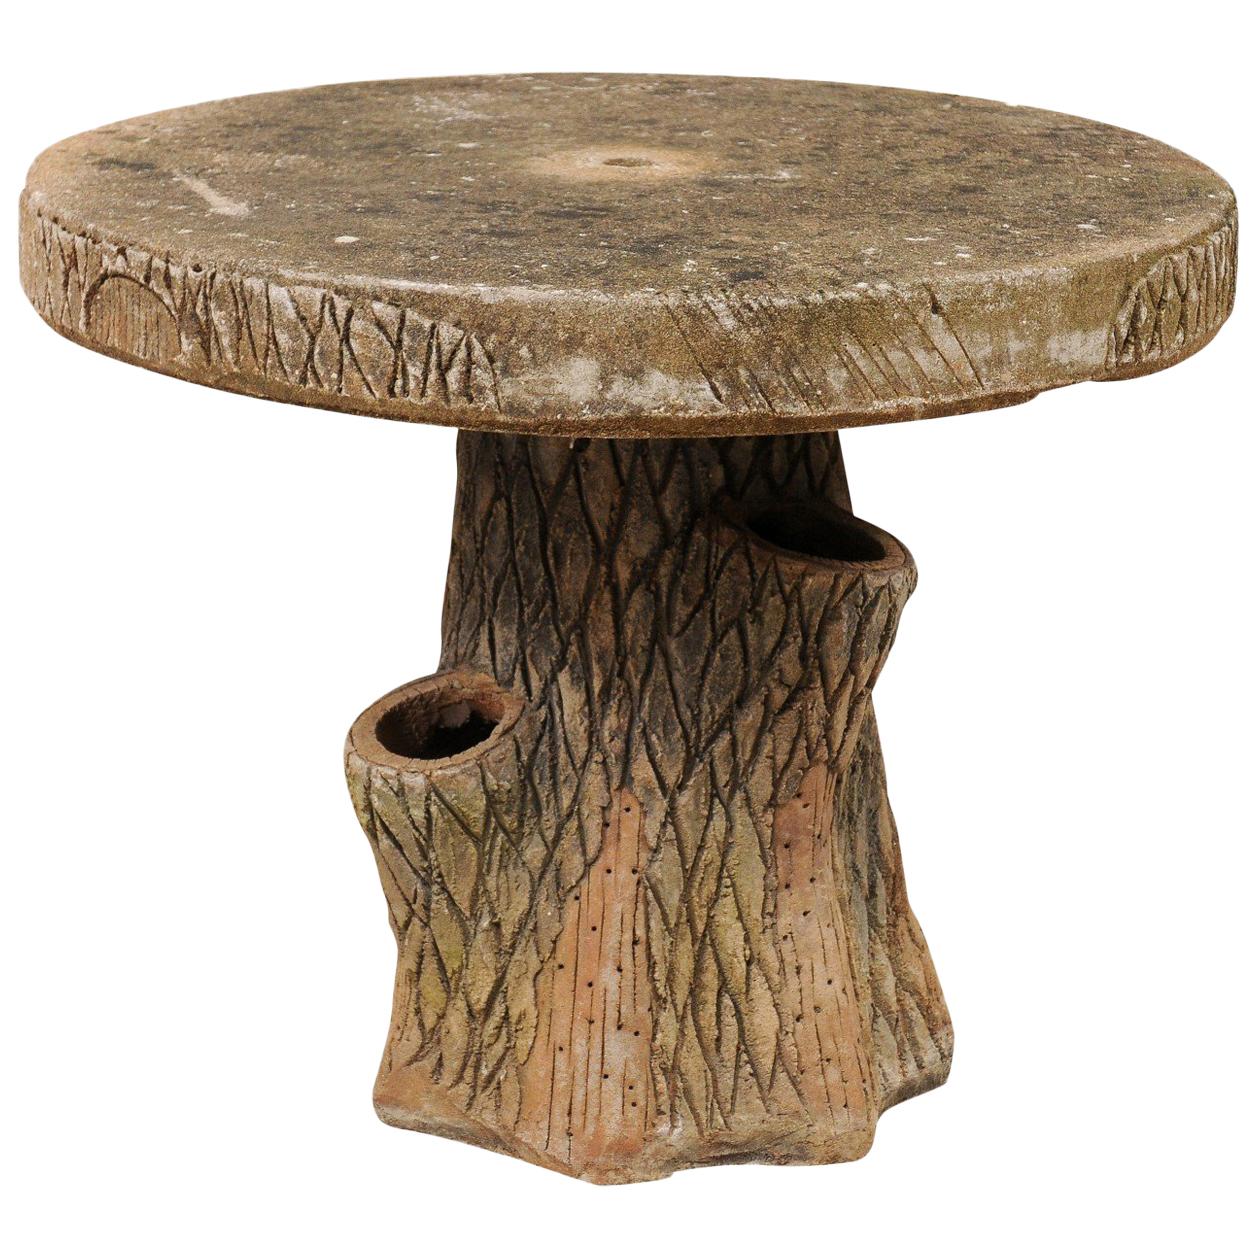 French Faux Bois Tree Stump Outdoor Garden, Porch or Patio Side Table